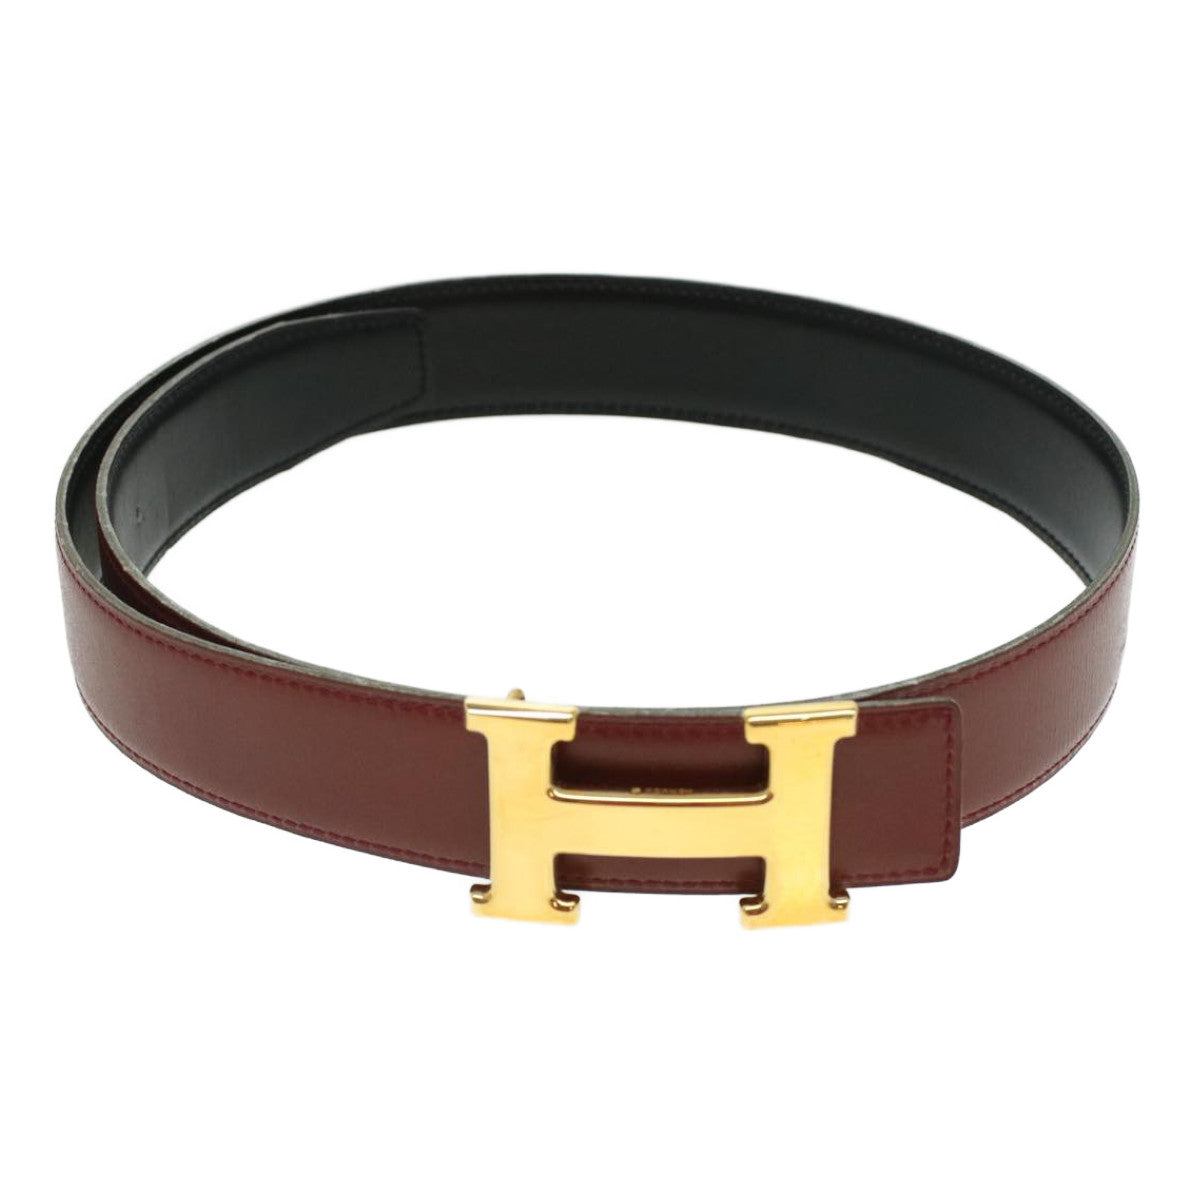 HERMES Belt Leather 29.5"" Red Auth am3774